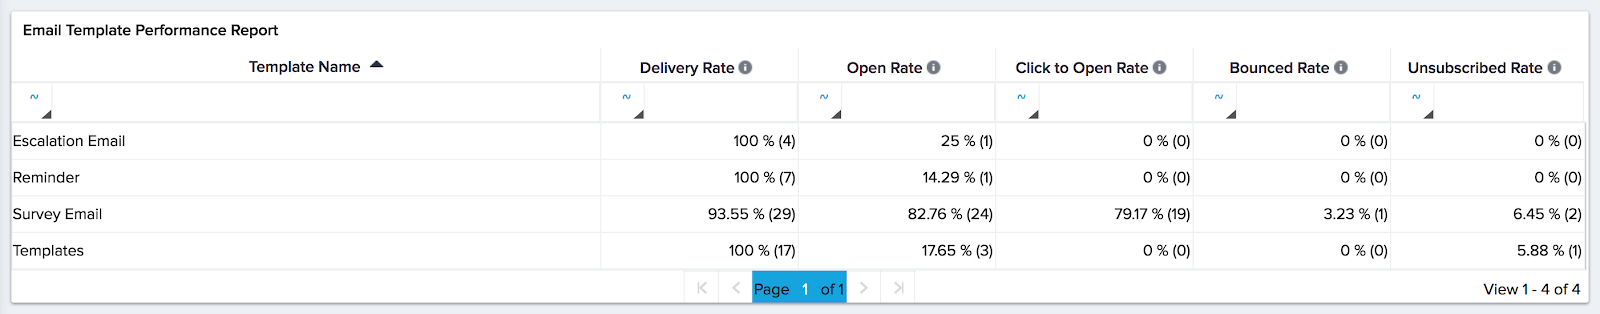 2 Access to new Email Template Performance Report.png